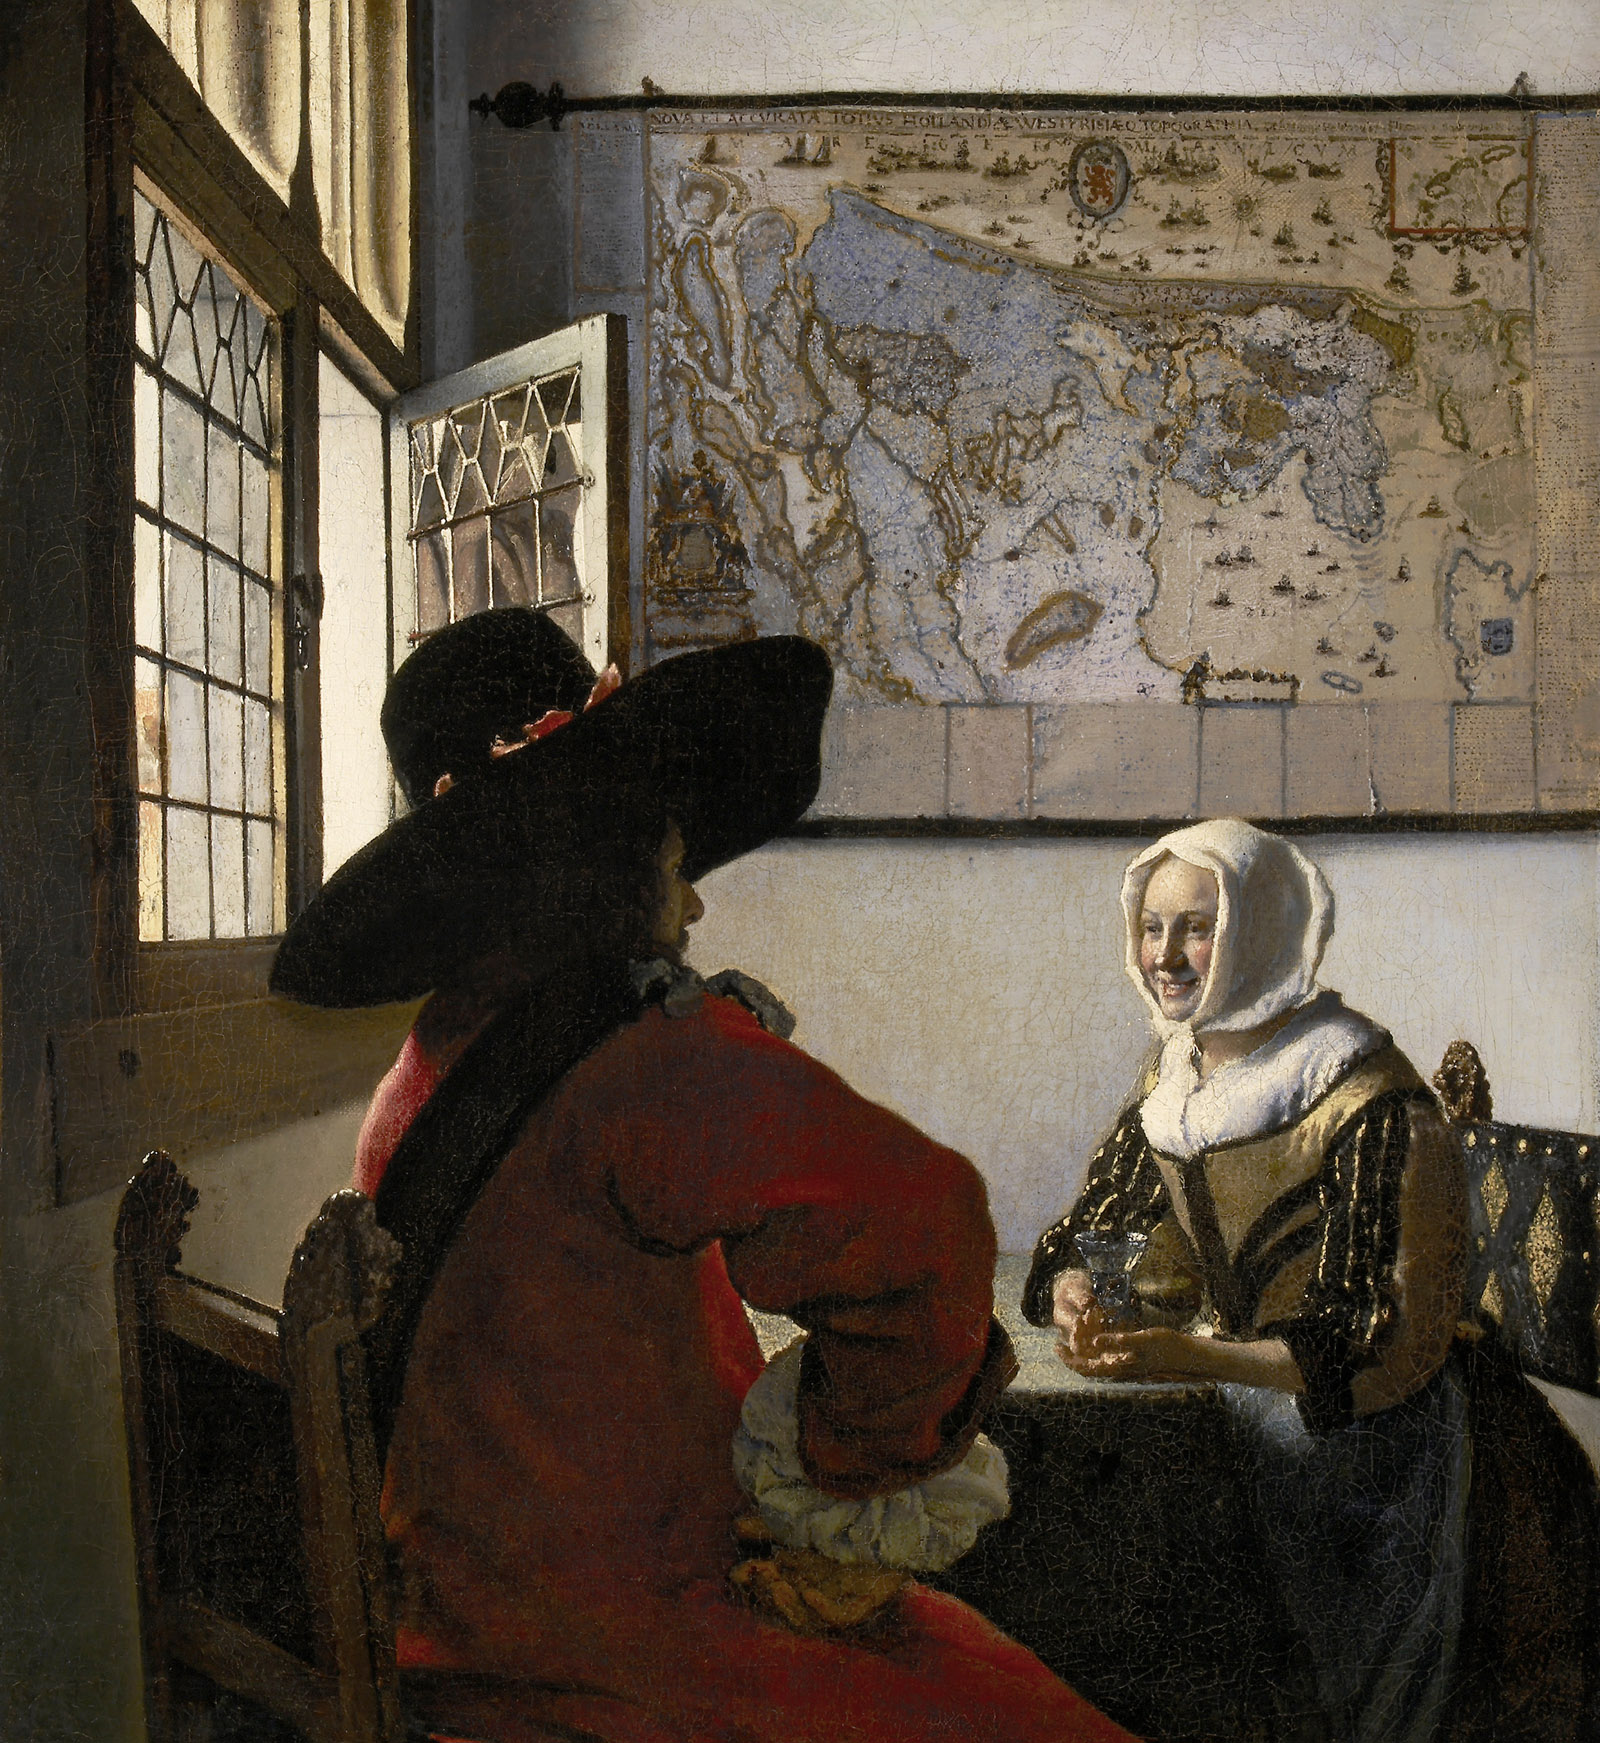 Officer and Laughing Girl; painting by Johannes Vermeer